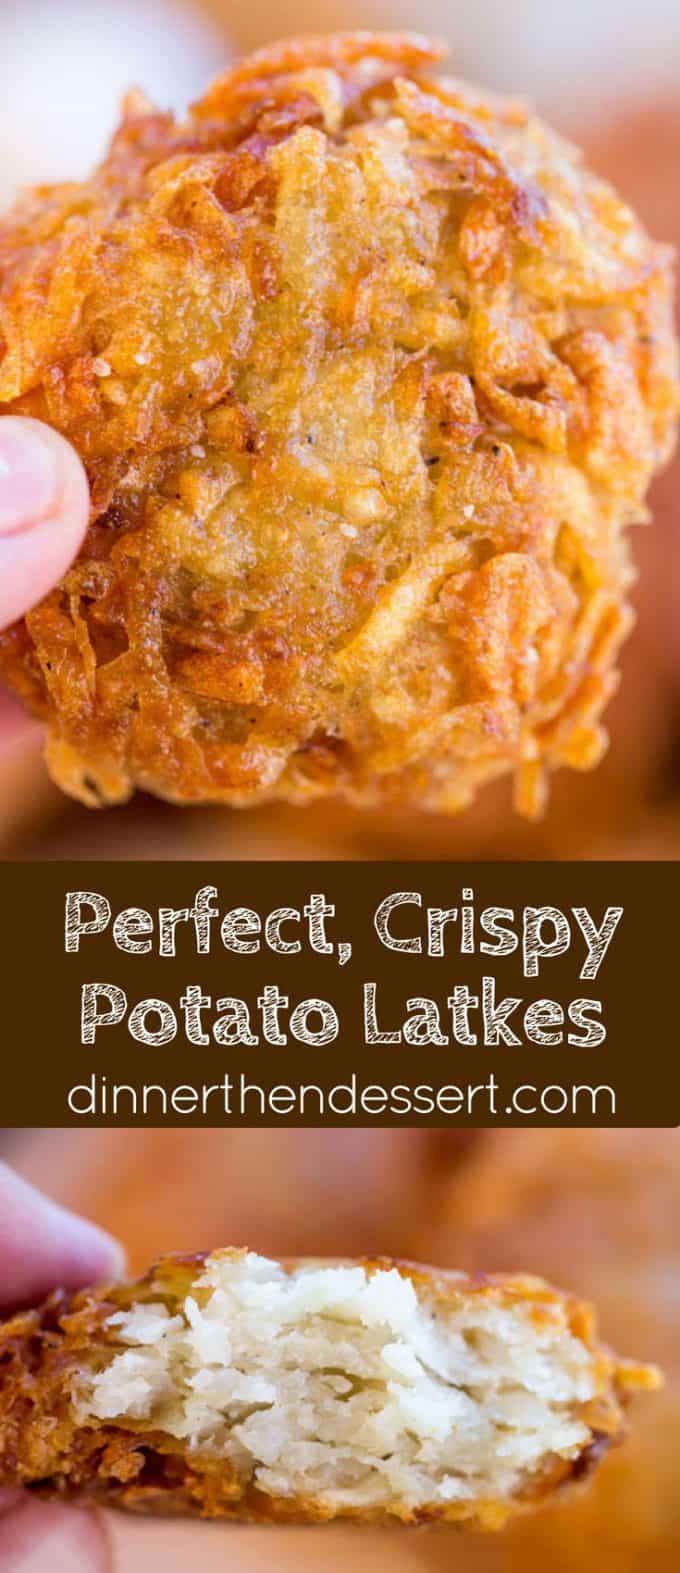 Perfect Potato Latkes with just a few ingredients and a bit of soaking time have the crispiest exteriors with the fluffiest centers. There won't be a single one left over.